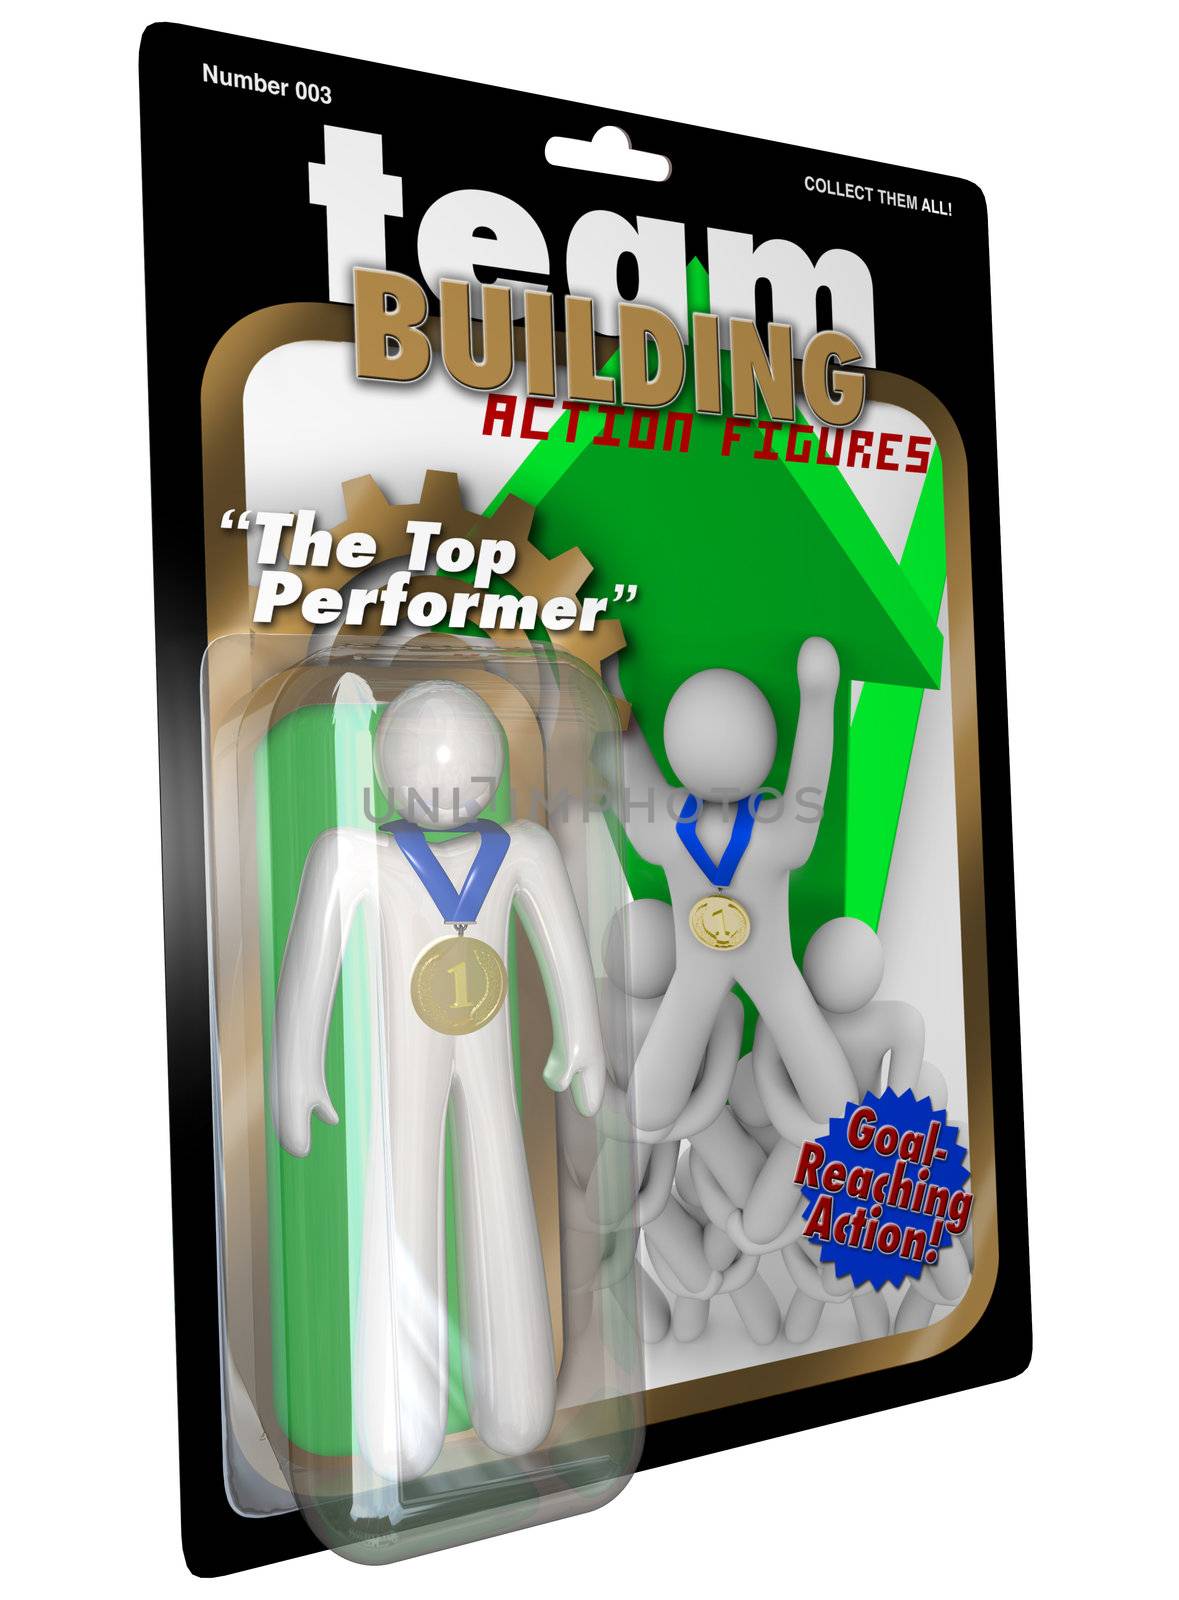 Top Performer Employee Action Figure Man in Package by iQoncept